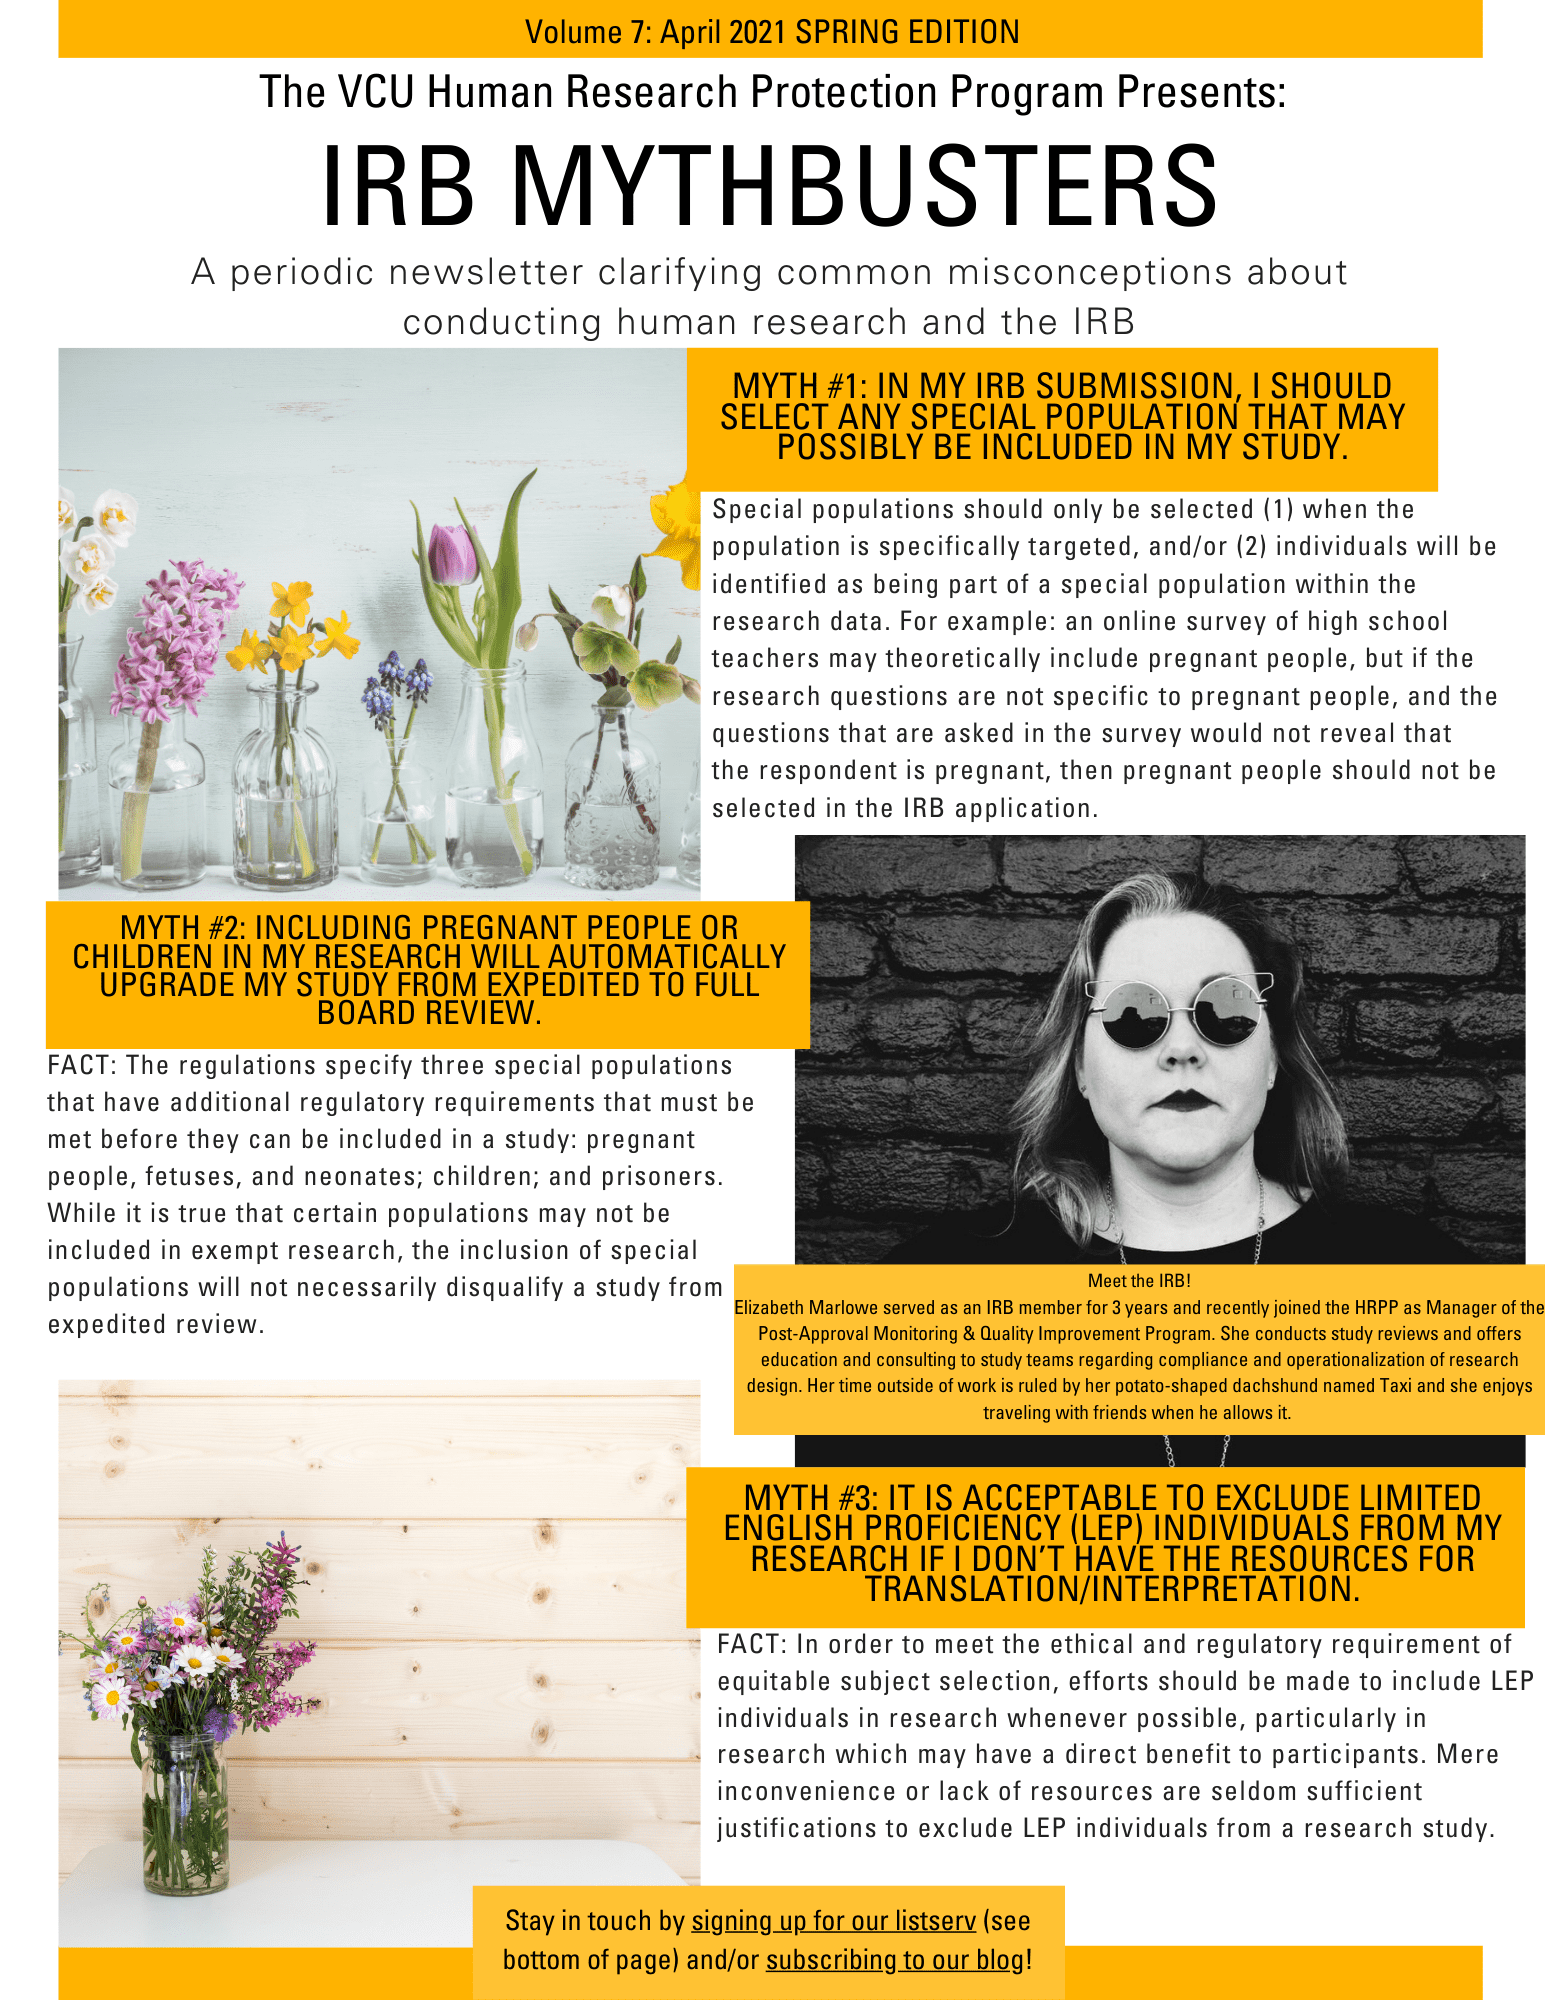 This is an image of the IRB Mythbusters Newsletter. It includes two spring-themed images, and a third image, which shows black and white photo of a woman standing against a brick wall and wearing sunglasses and dark lipstick. The caption to that picture says “Meet the IRB! Elizabeth Marlowe served as an IRB member for 3 years and recently joined the HRPP as Manager of the Post-Approval Monitoring & Quality Improvement Program. She conducts study reviews and offers education and consulting to study teams regarding compliance and operationalization of research design. Her time outside of work is ruled by her potato-shaped dachshund named Taxi and she enjoys traveling with friends when he allows it. ” The rest of the newsletter contains the same myths and facts as the blog post.